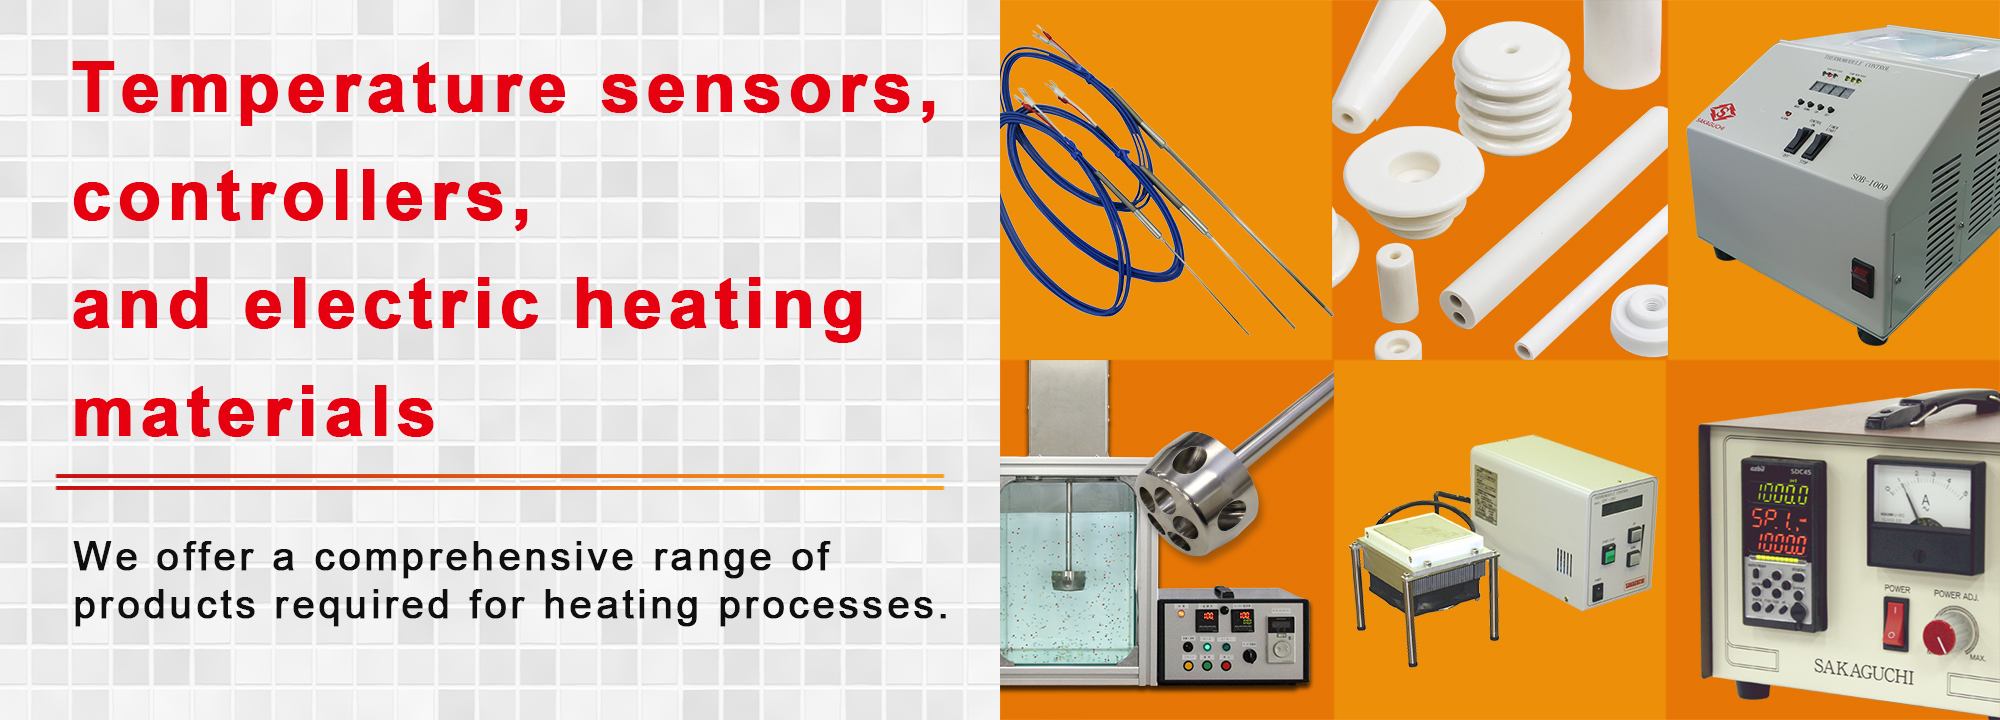 Temperature sensors, controllers, and electric heating materials